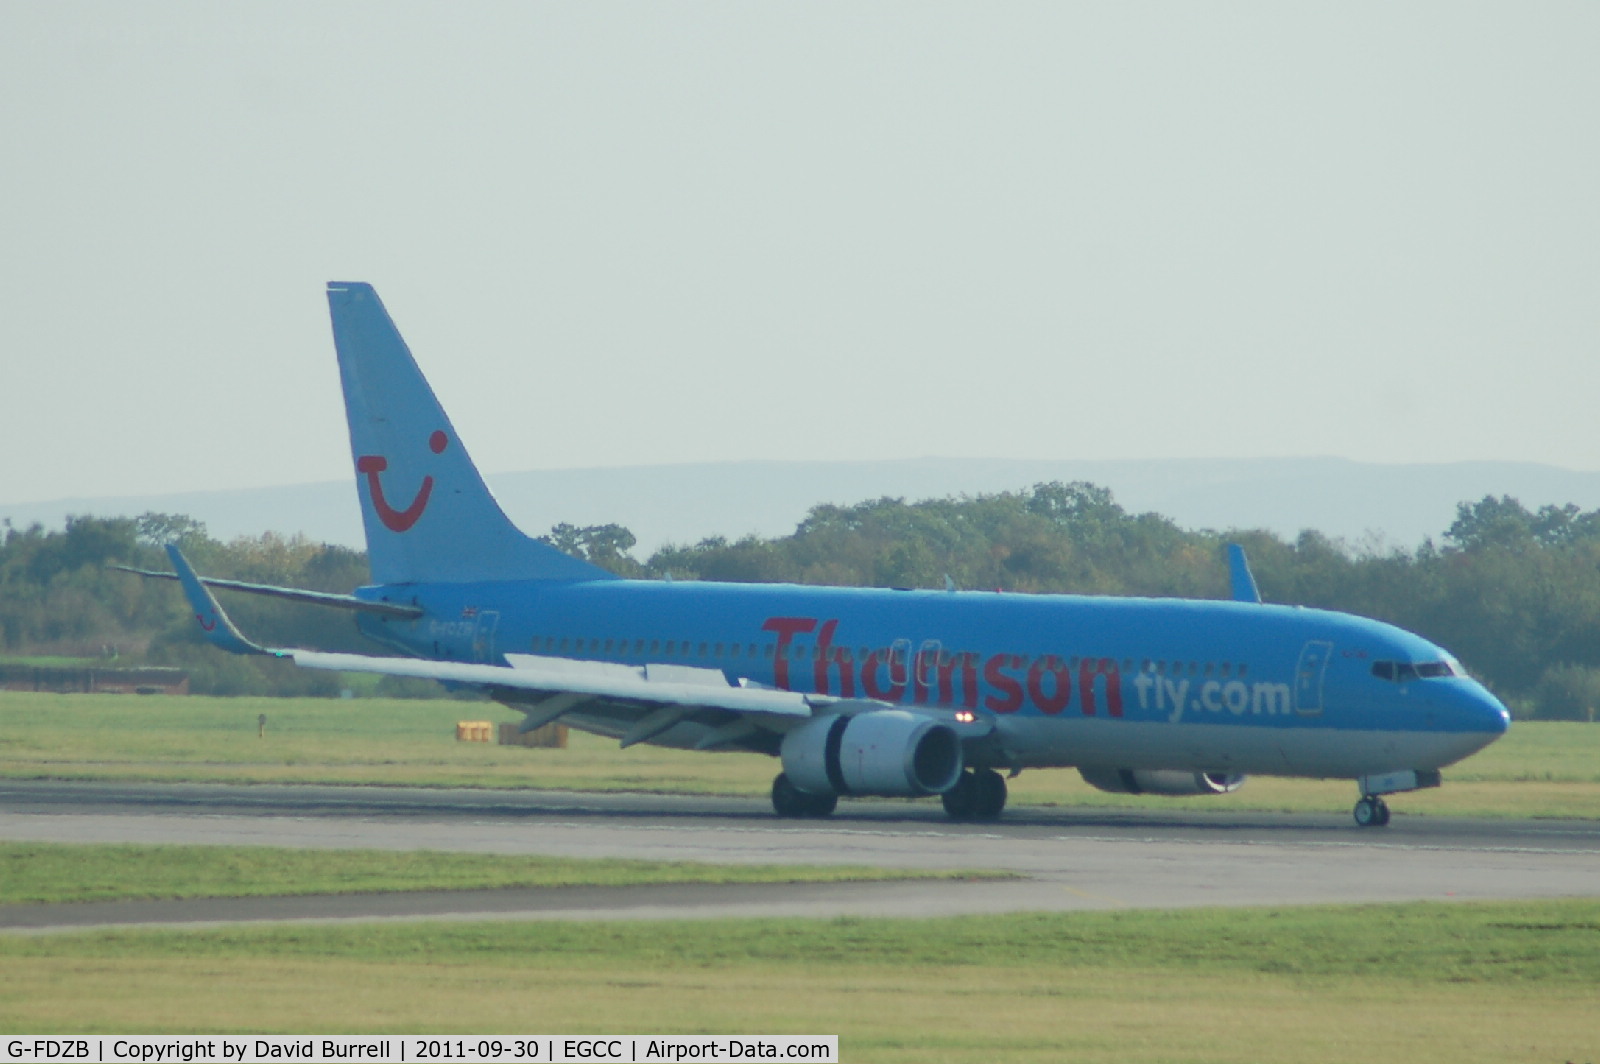 G-FDZB, 2007 Boeing 737-8K5 C/N 35131, Thomson Boeing 737 Landed at Manchester Airport.